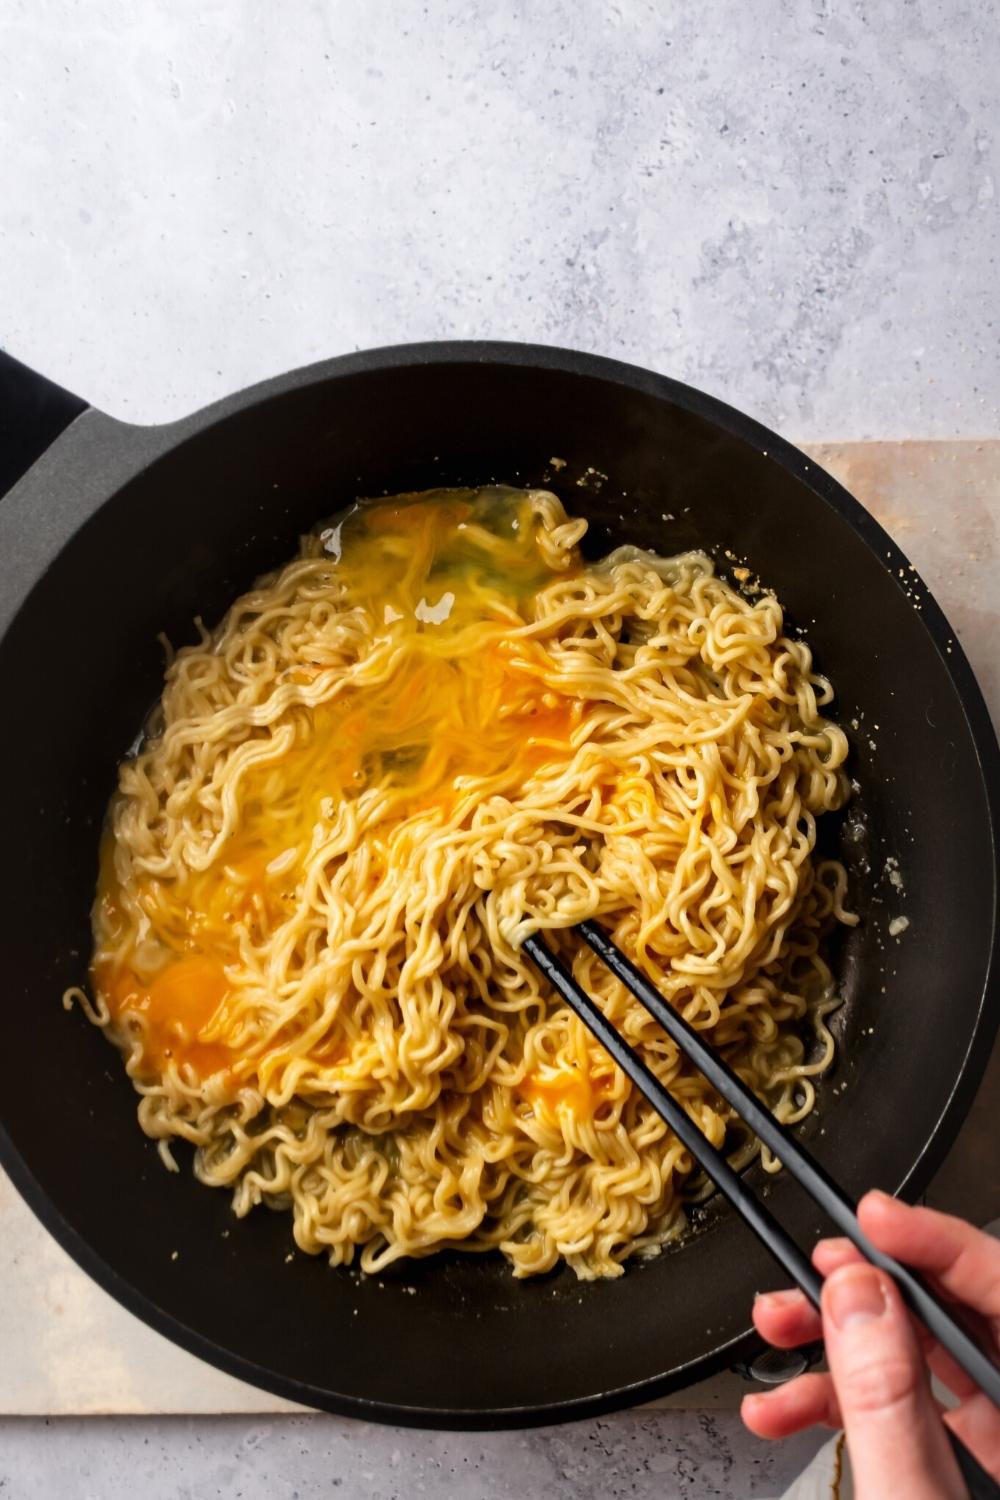 Ramen noodles and an egg in a black pan. A hand is holding two black chopsticks that are submerged in the middle of the noodles.